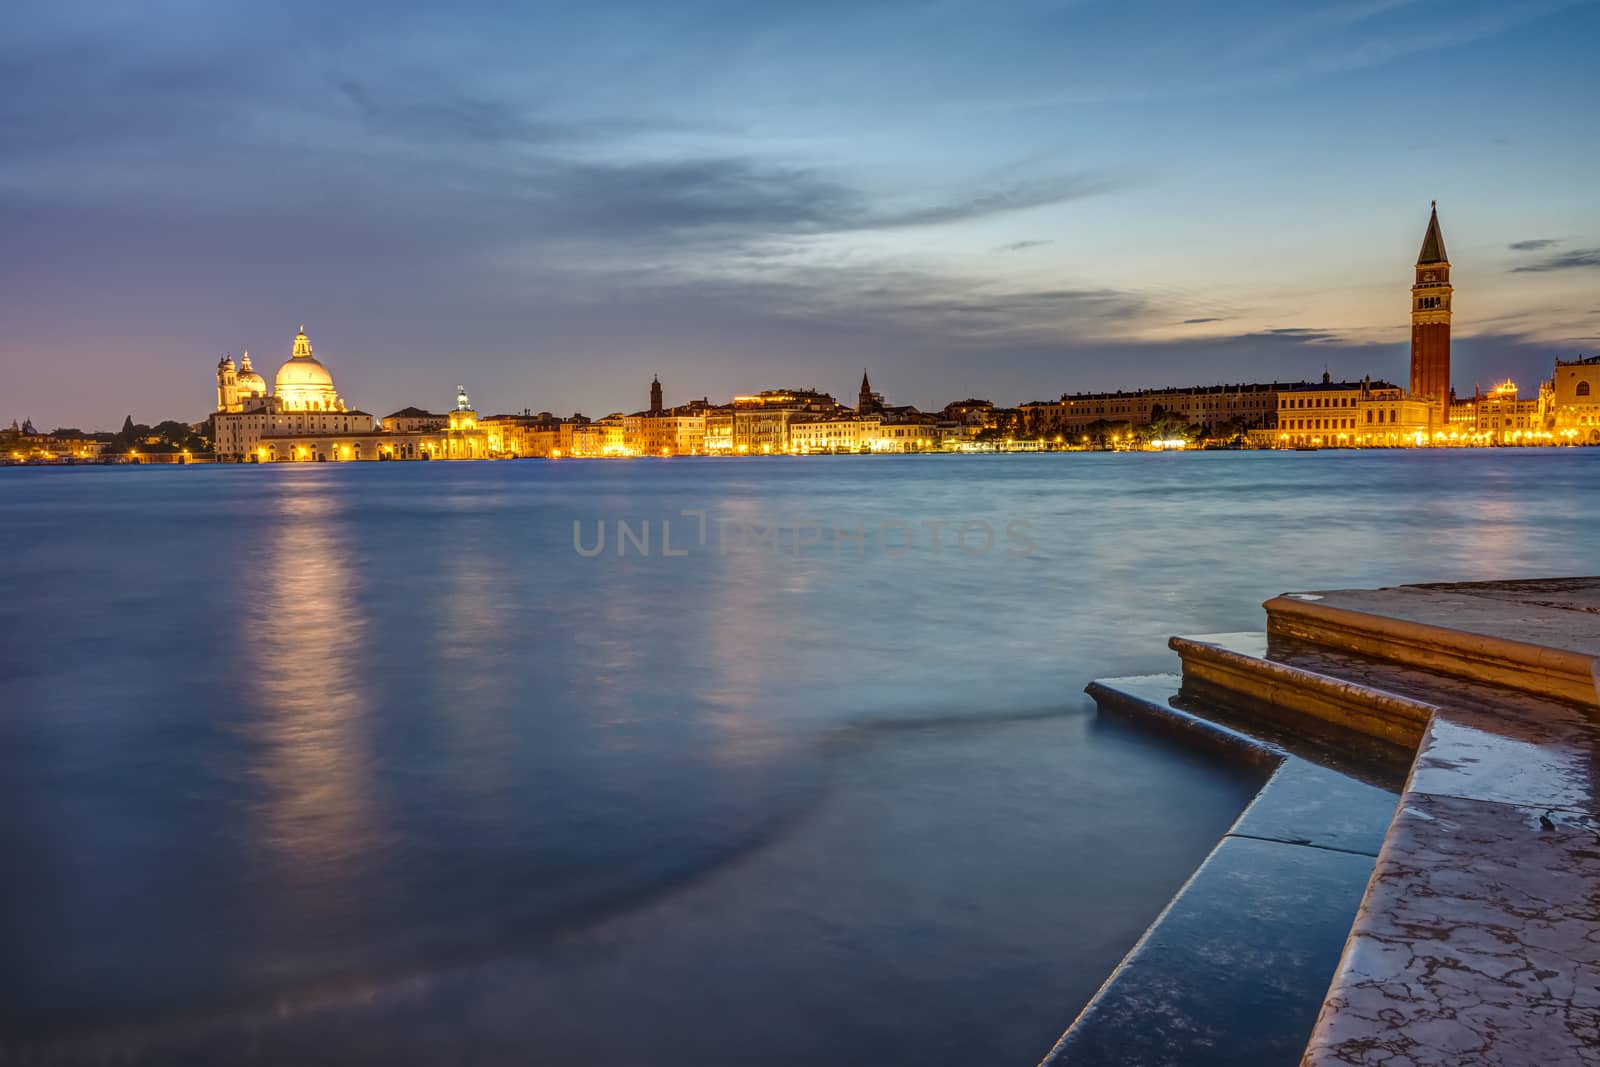 View to St Marks square and Punta della Dogana in Venice at night